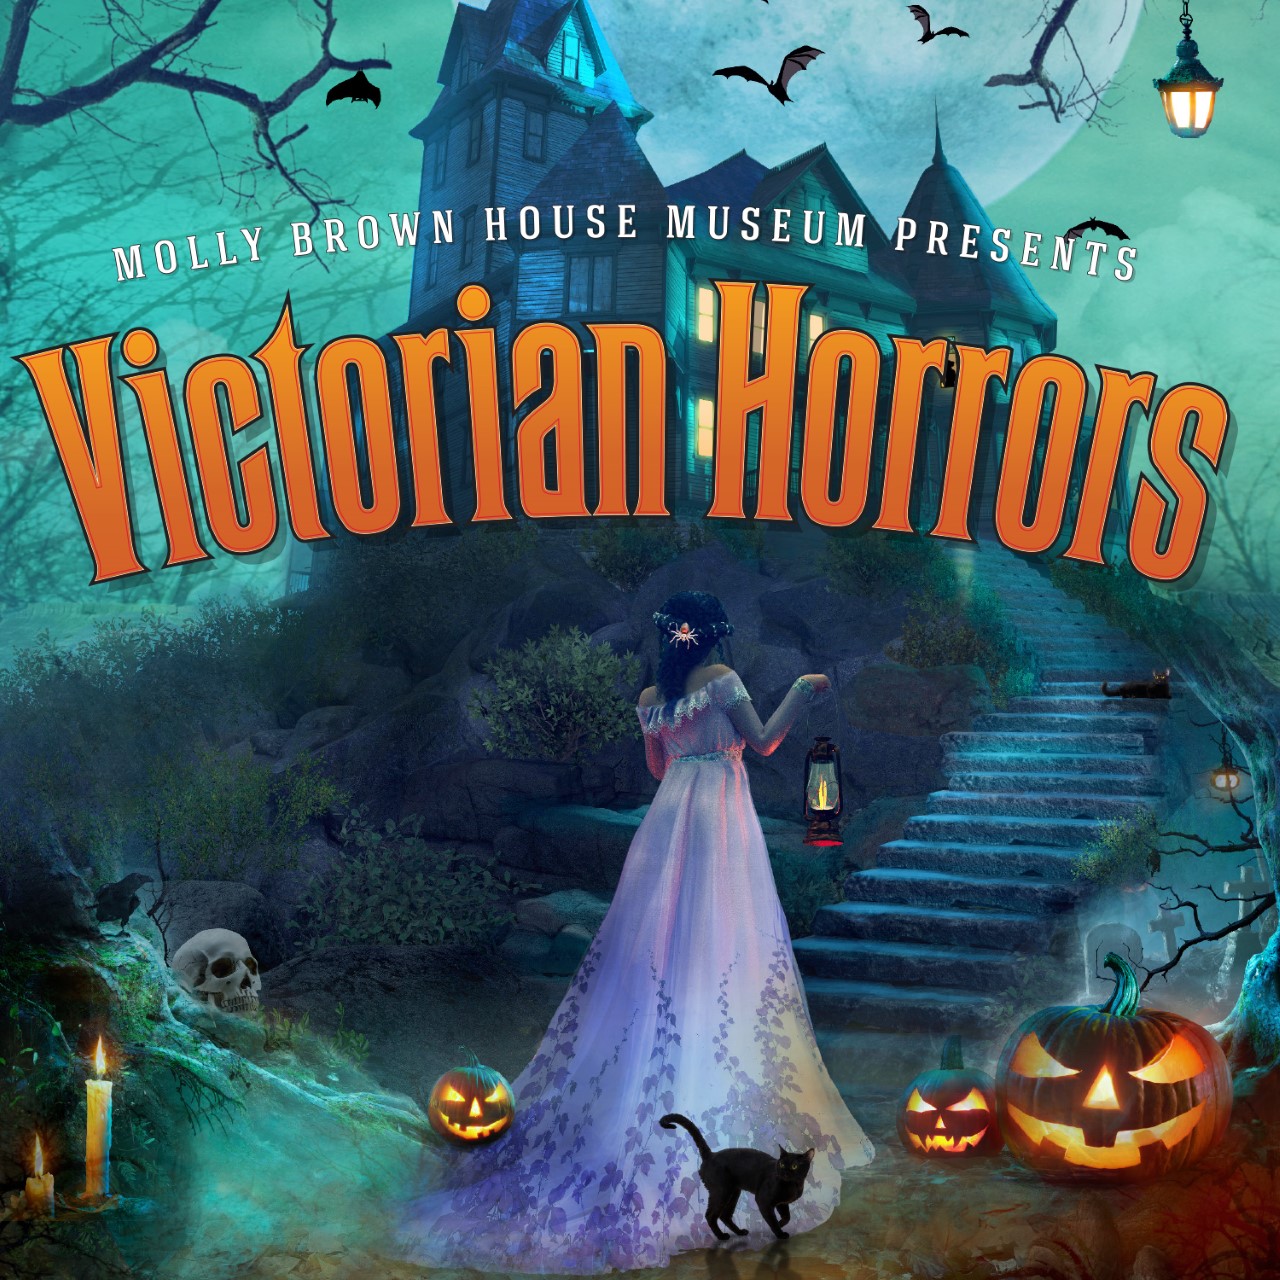 Did you miss Victorian Horrors in 2022?